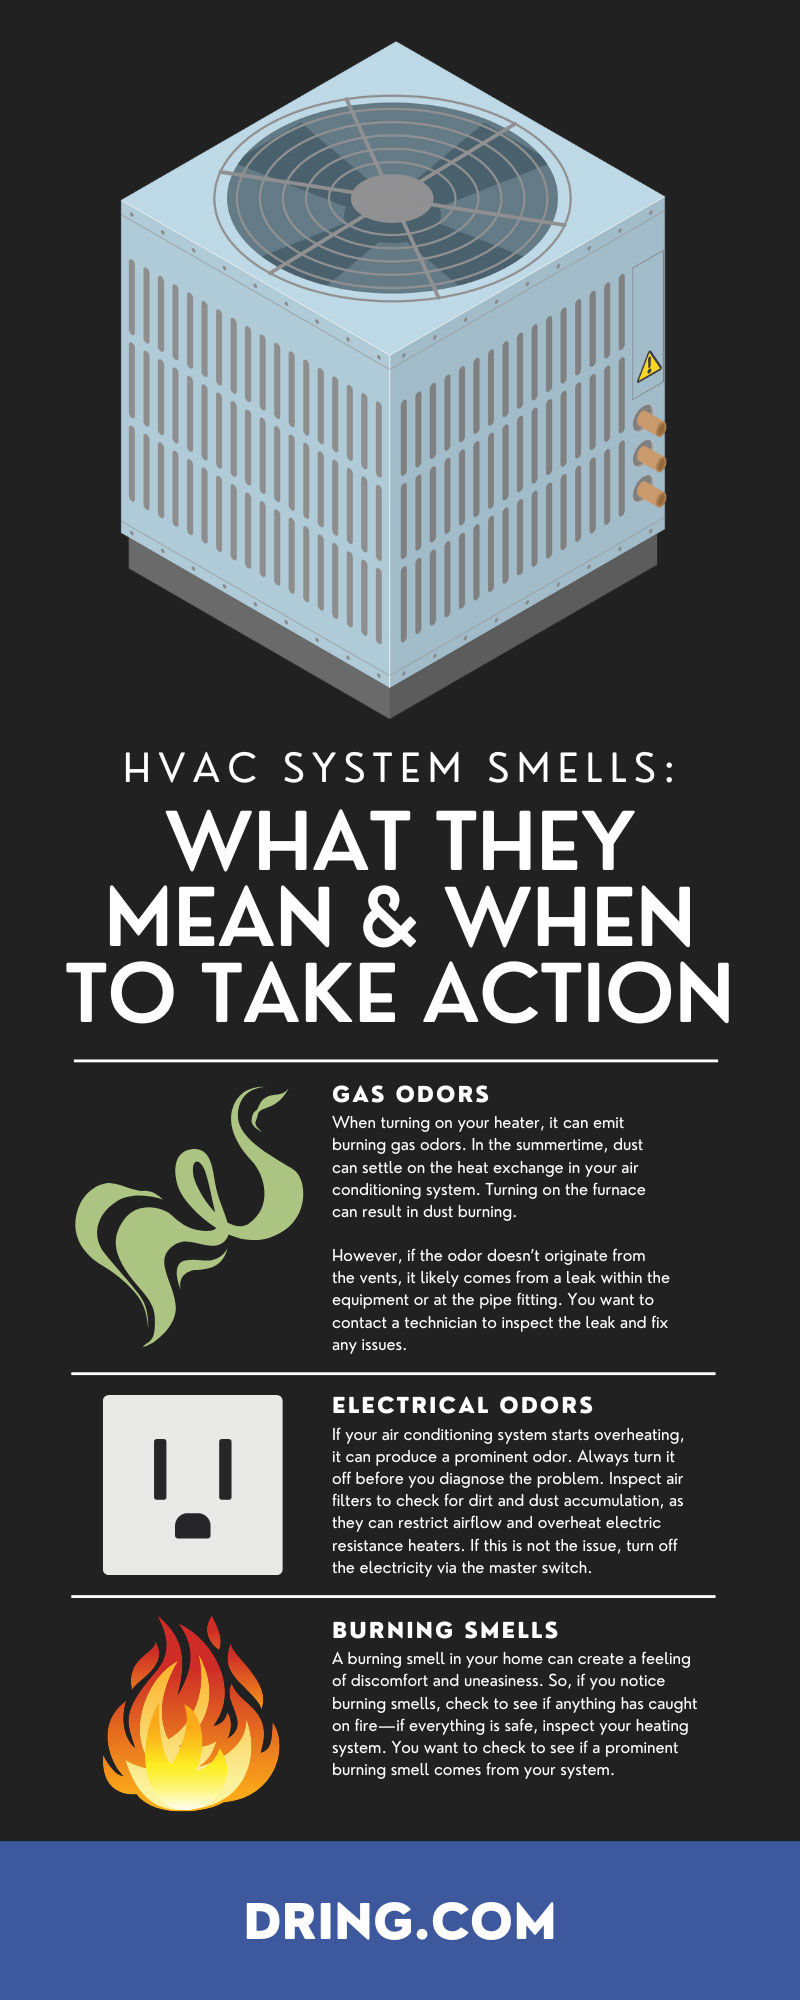 HVAC System Smells: What They Mean & When To Take Action